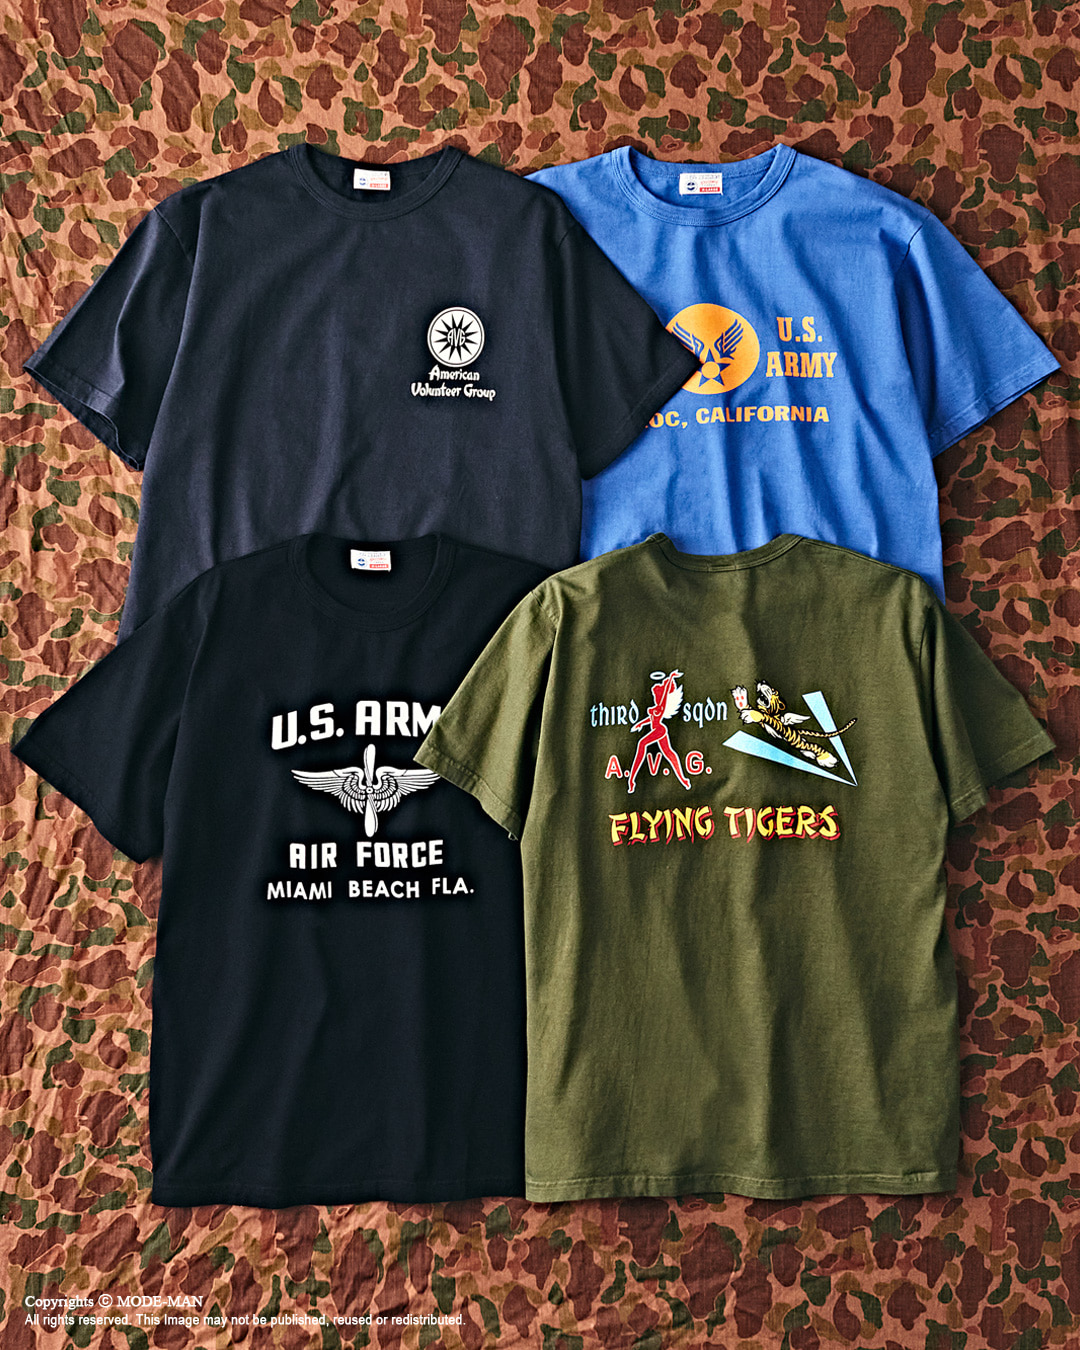 [BUZZ RICKSON'S] MILITARY GRAPHIC S/S T-SHIRTS